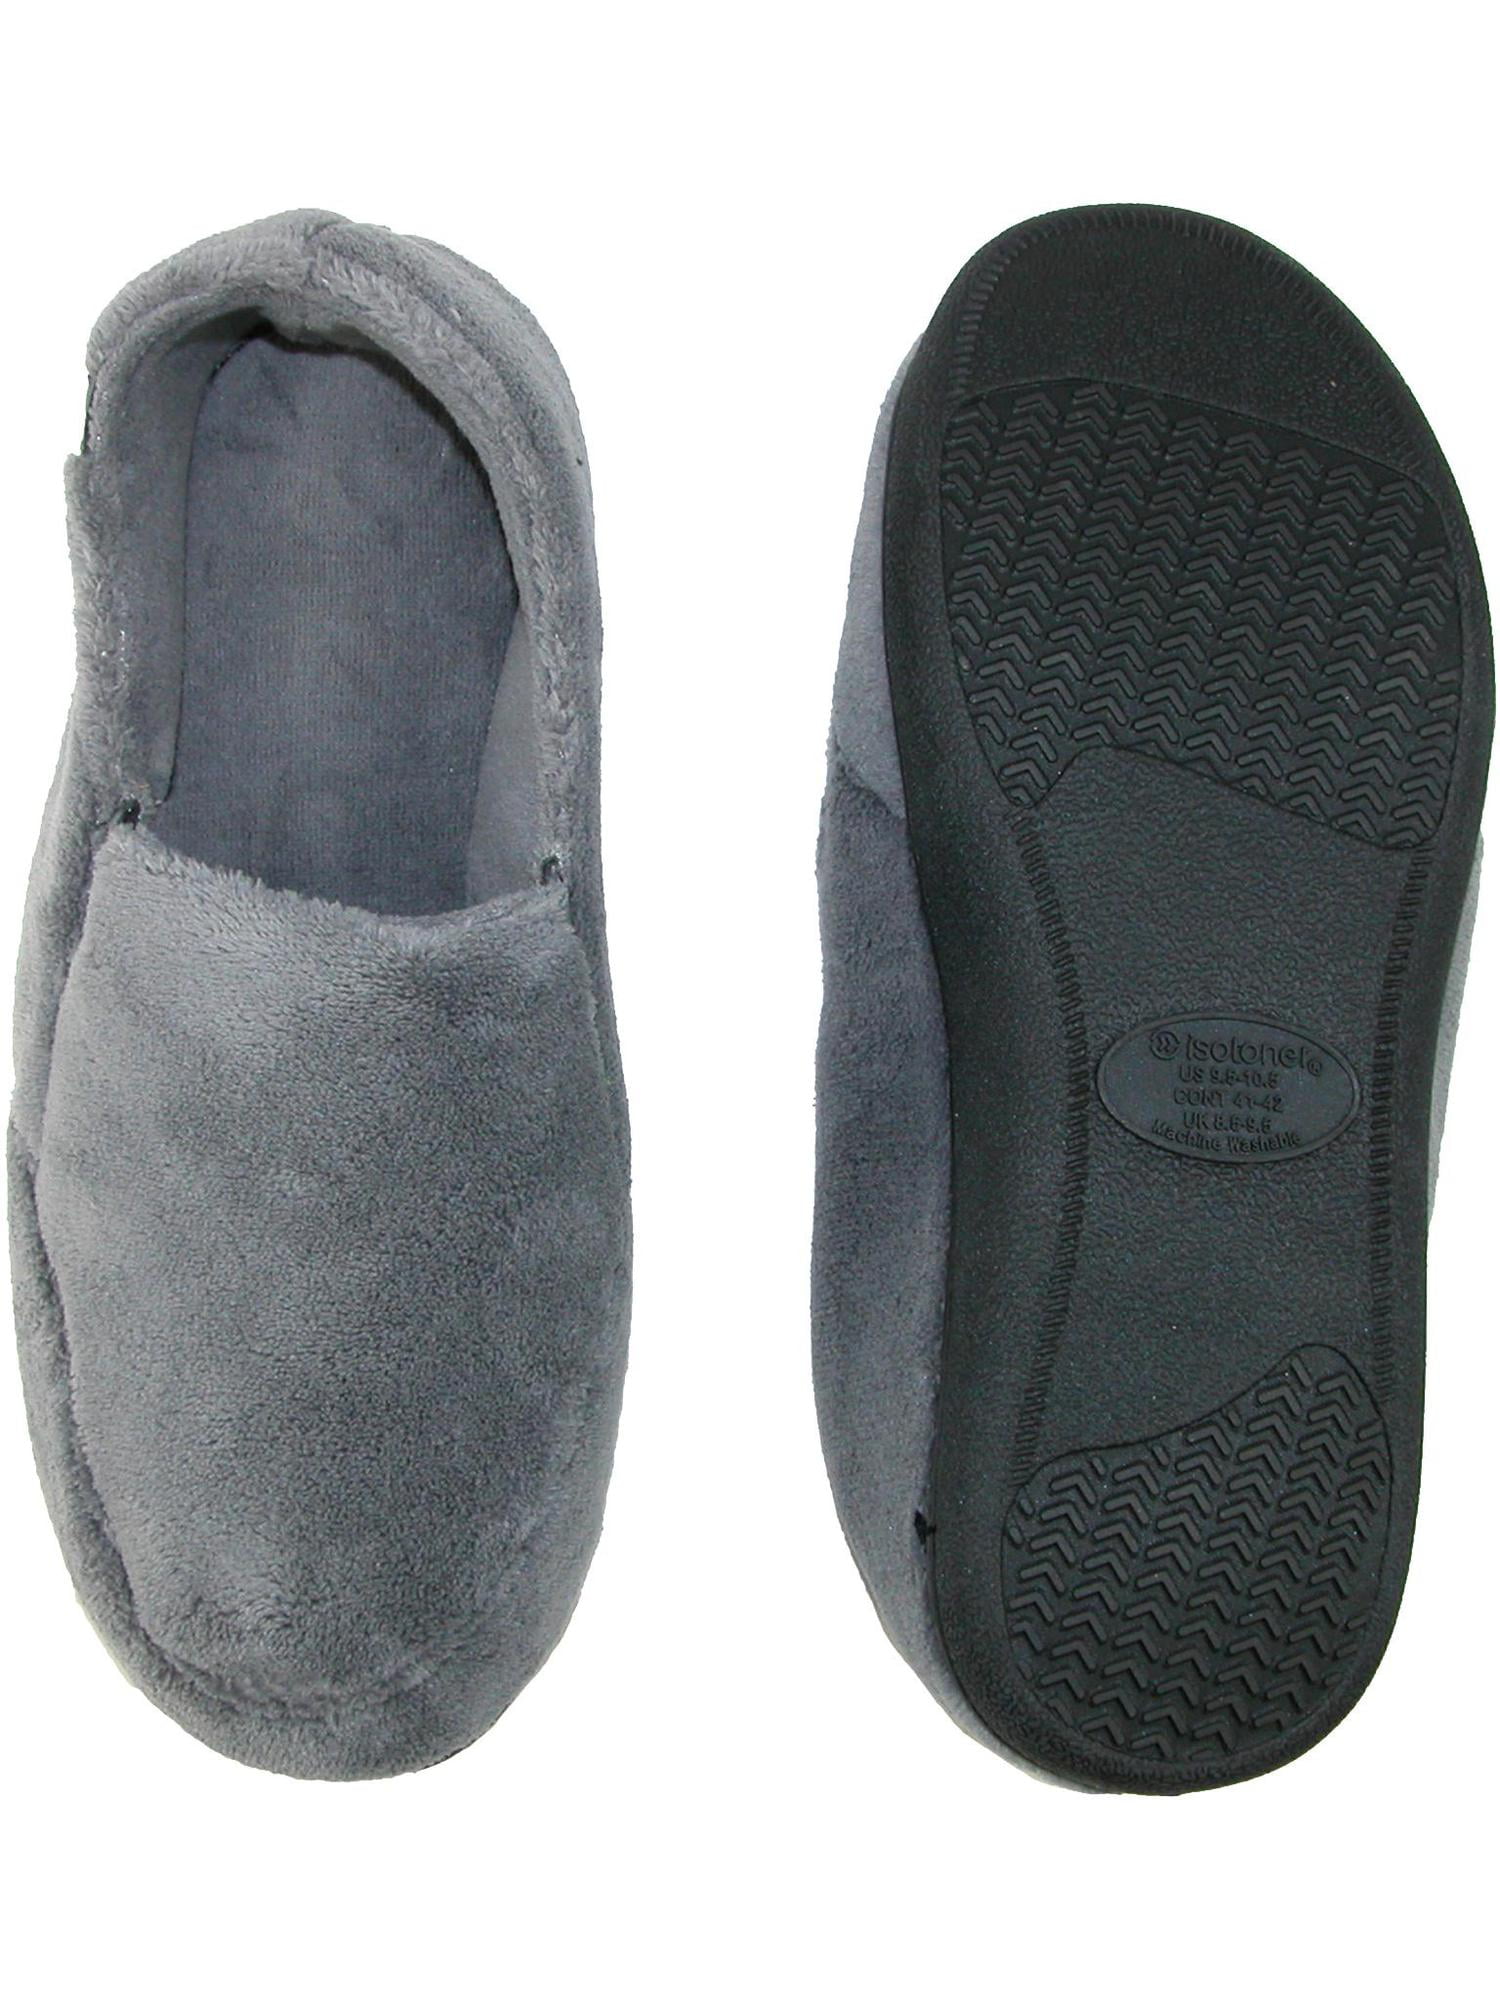 mens isotoner house shoes